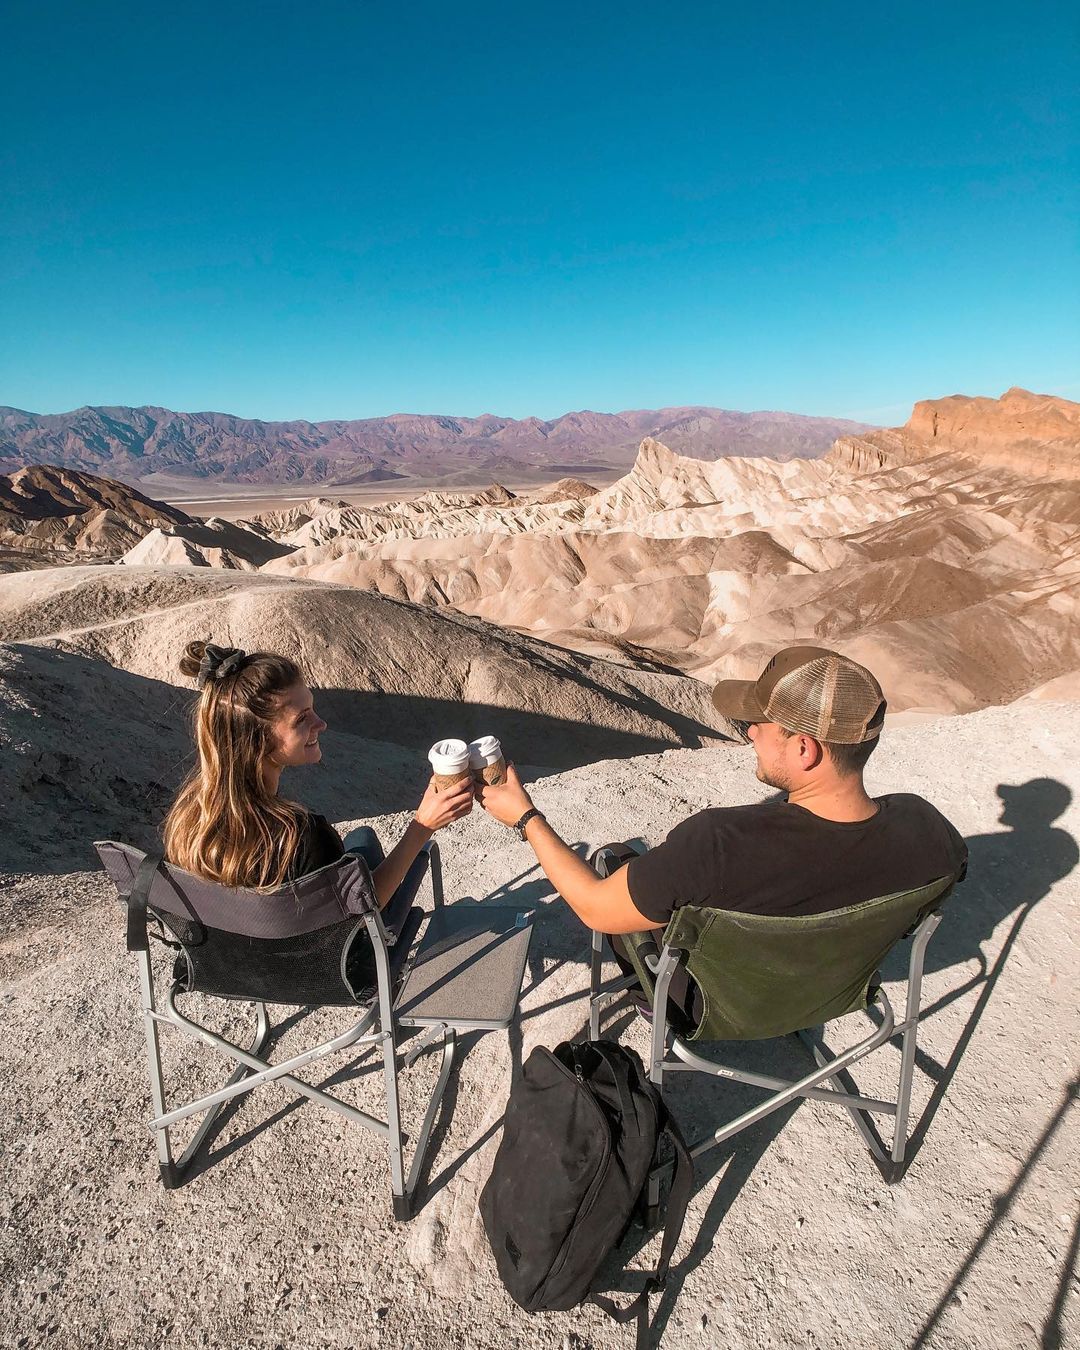 Two People Sitting on Camping Chairs in Death Valley. Photo by Instagram user @onworldtravel